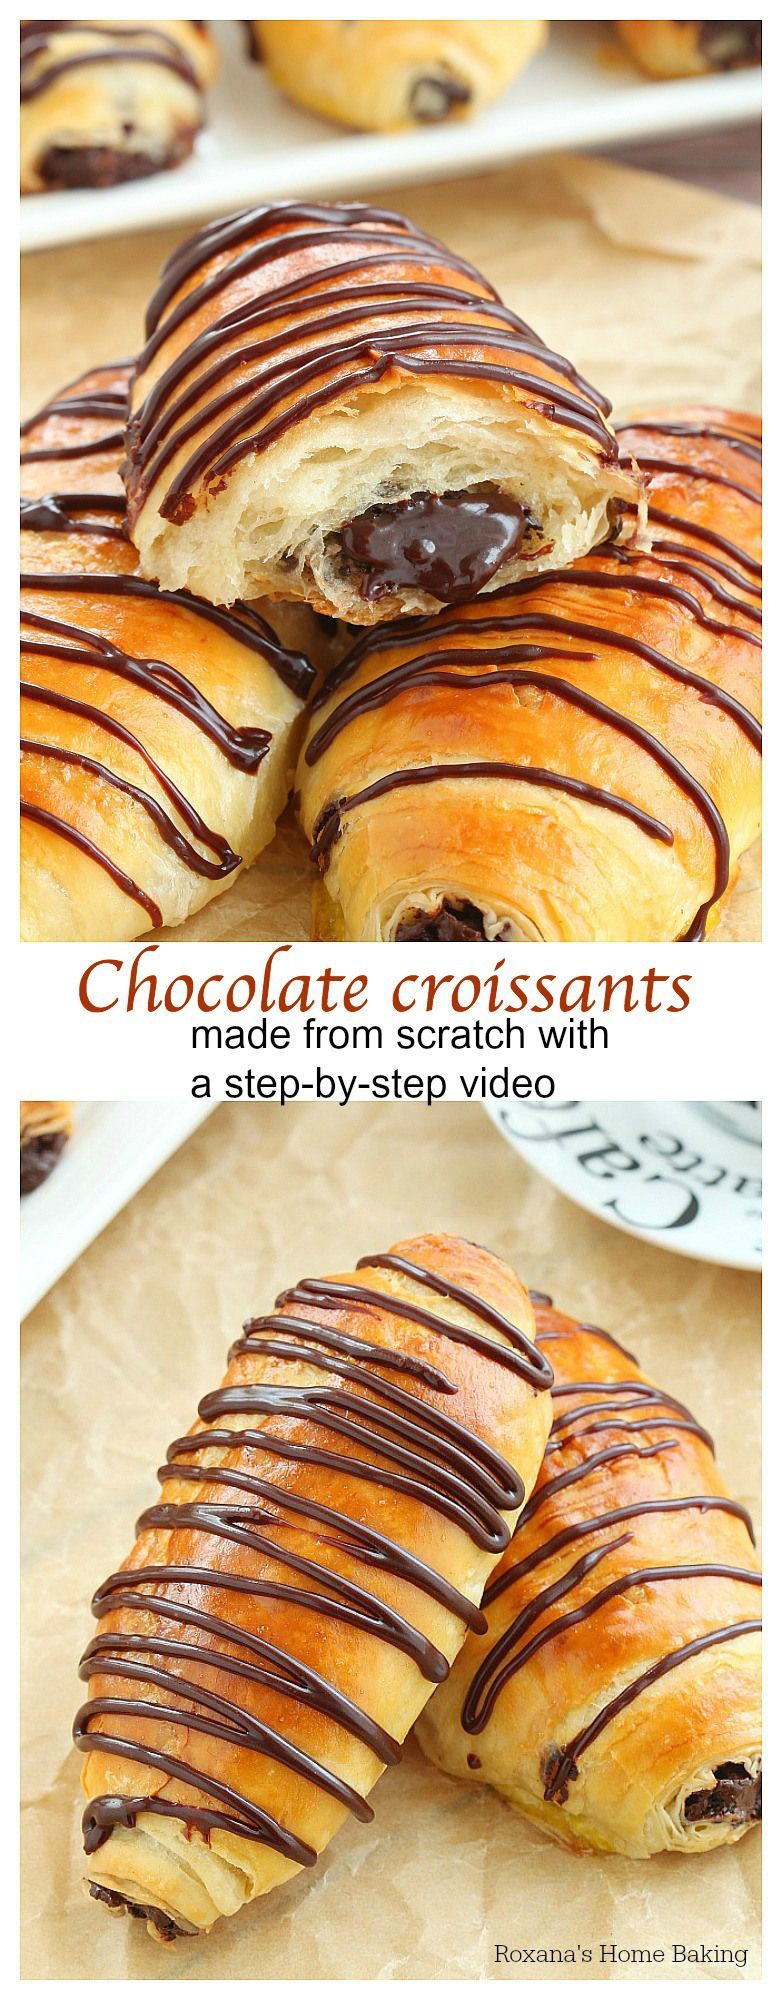 Layer upon layer of light, buttery flaky pastry filled with rich chocolate and drizzled with more chocolate, these made from